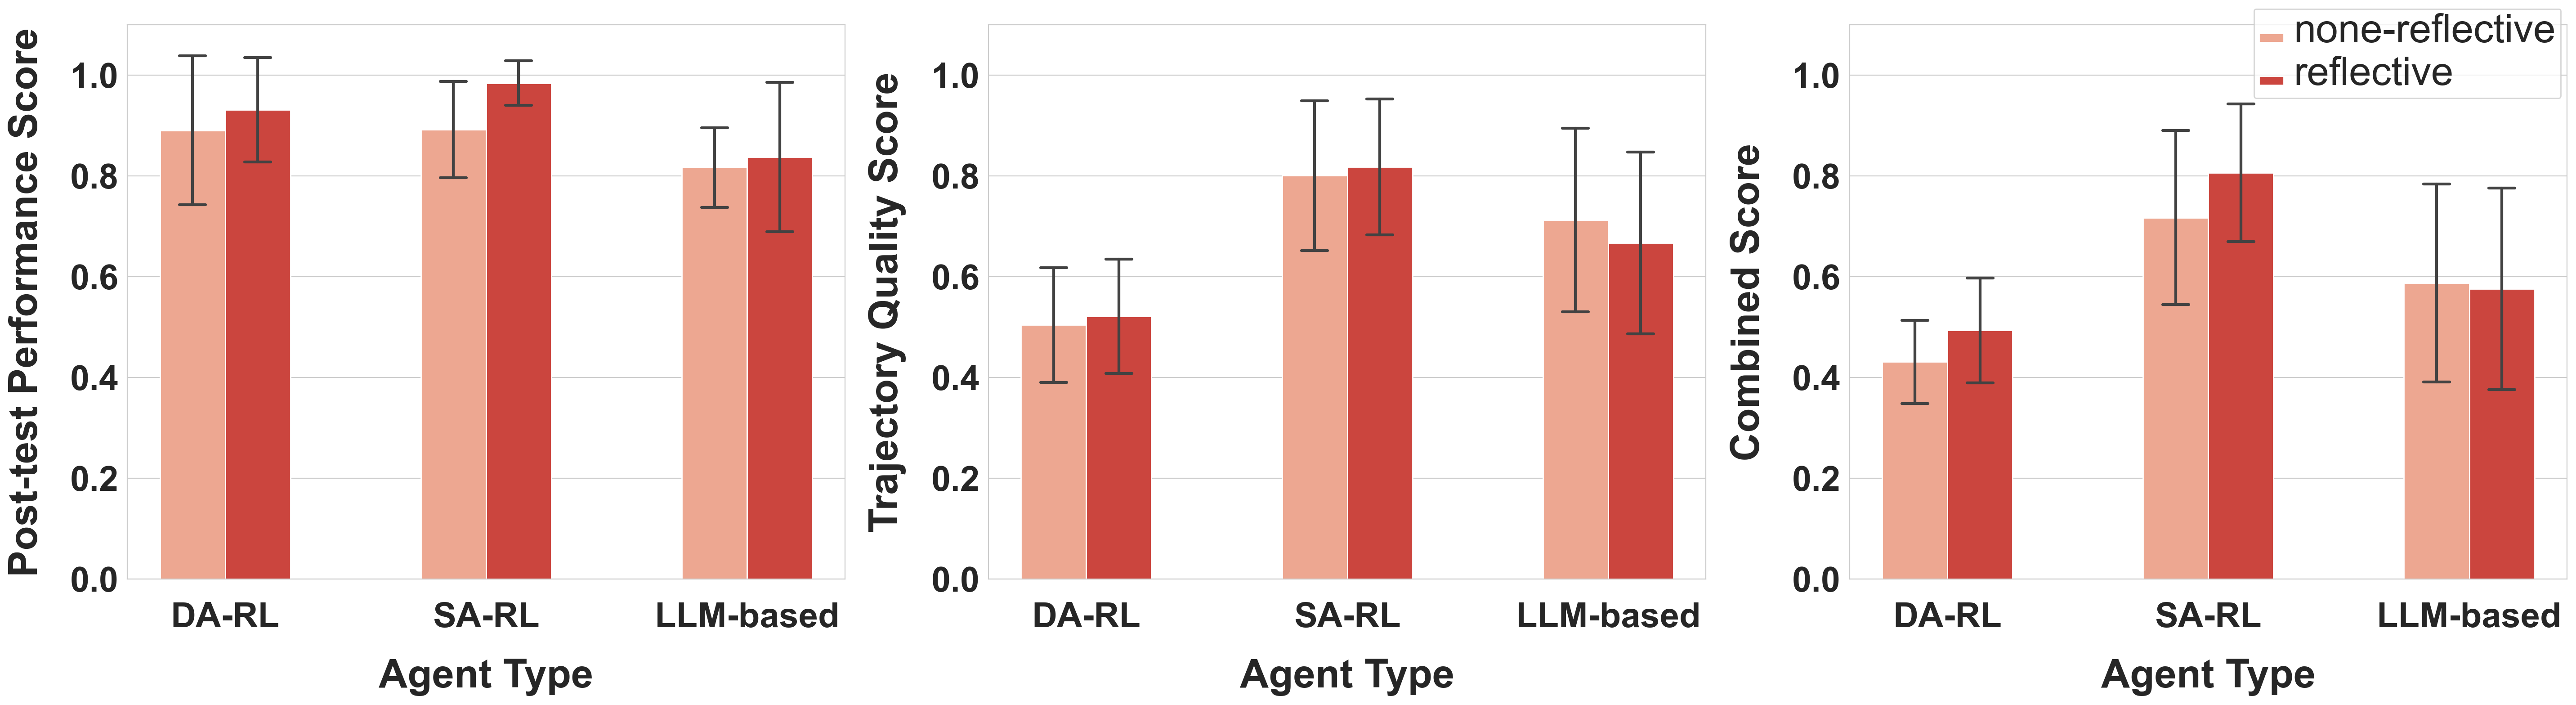 Performance of reflective and none-reflective agents on PharmaSimText